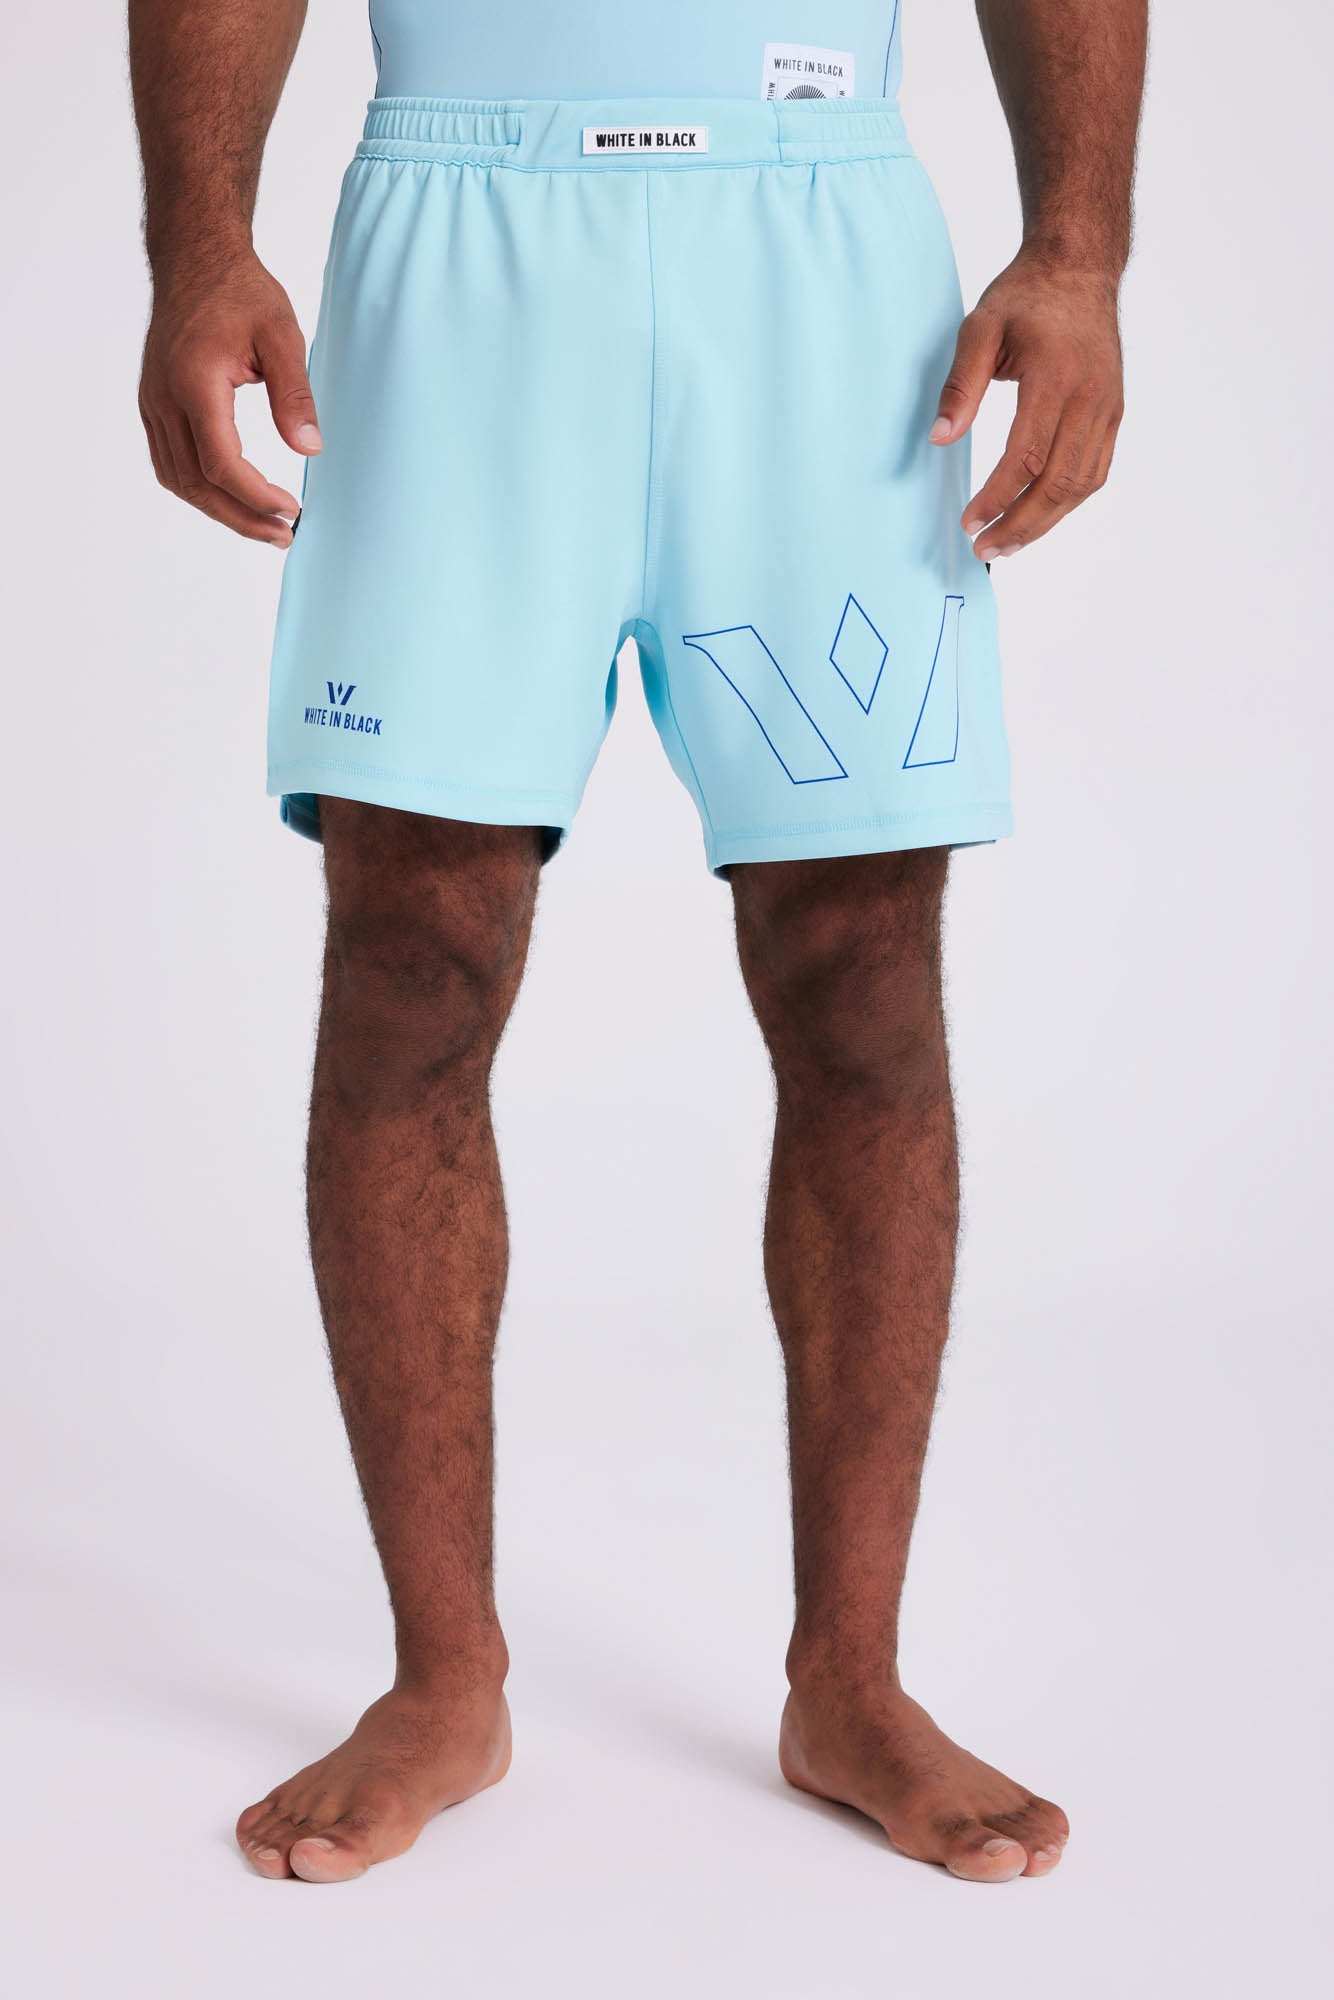 COLL1: Shorts Black Blue White – in